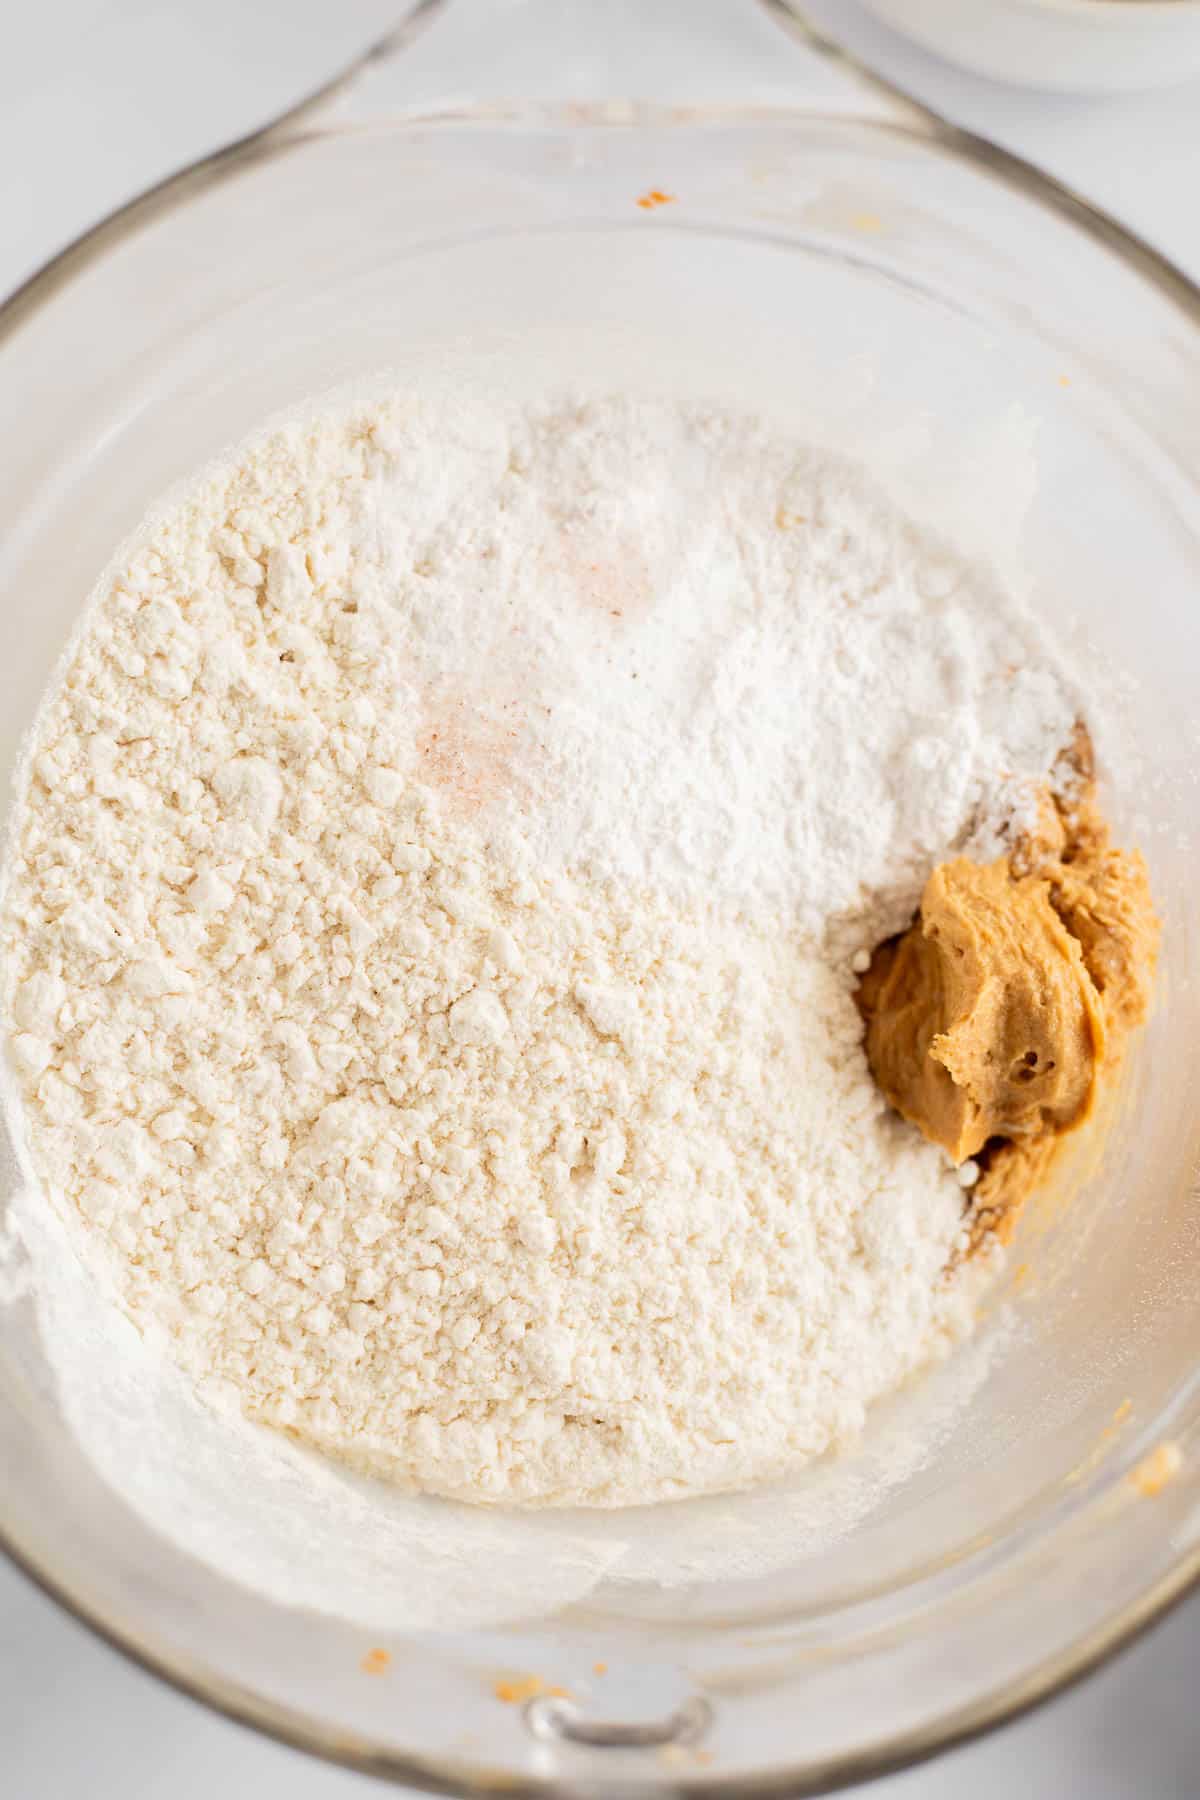 flour, baking soda, and salt in a glass bowl.